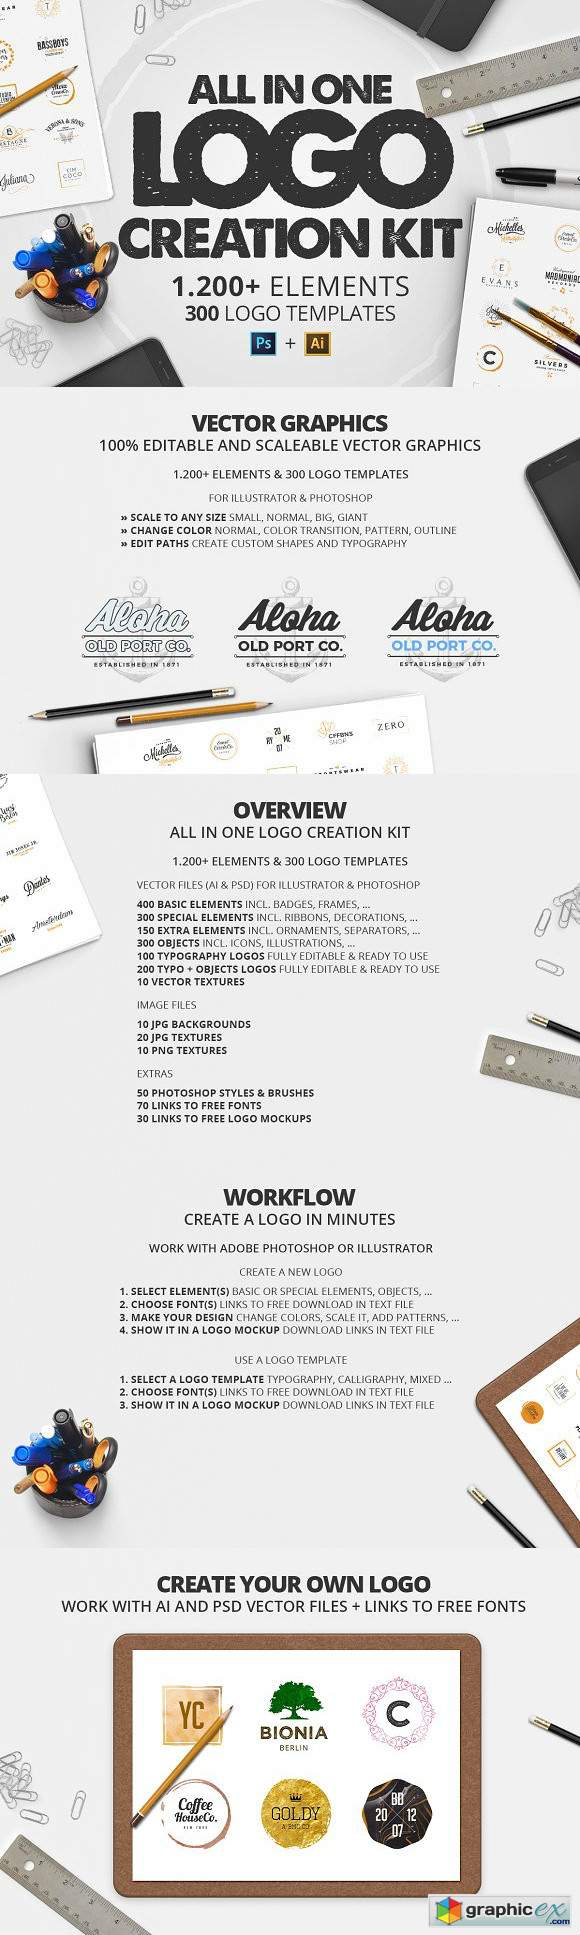 All in One Logo Creation Kit